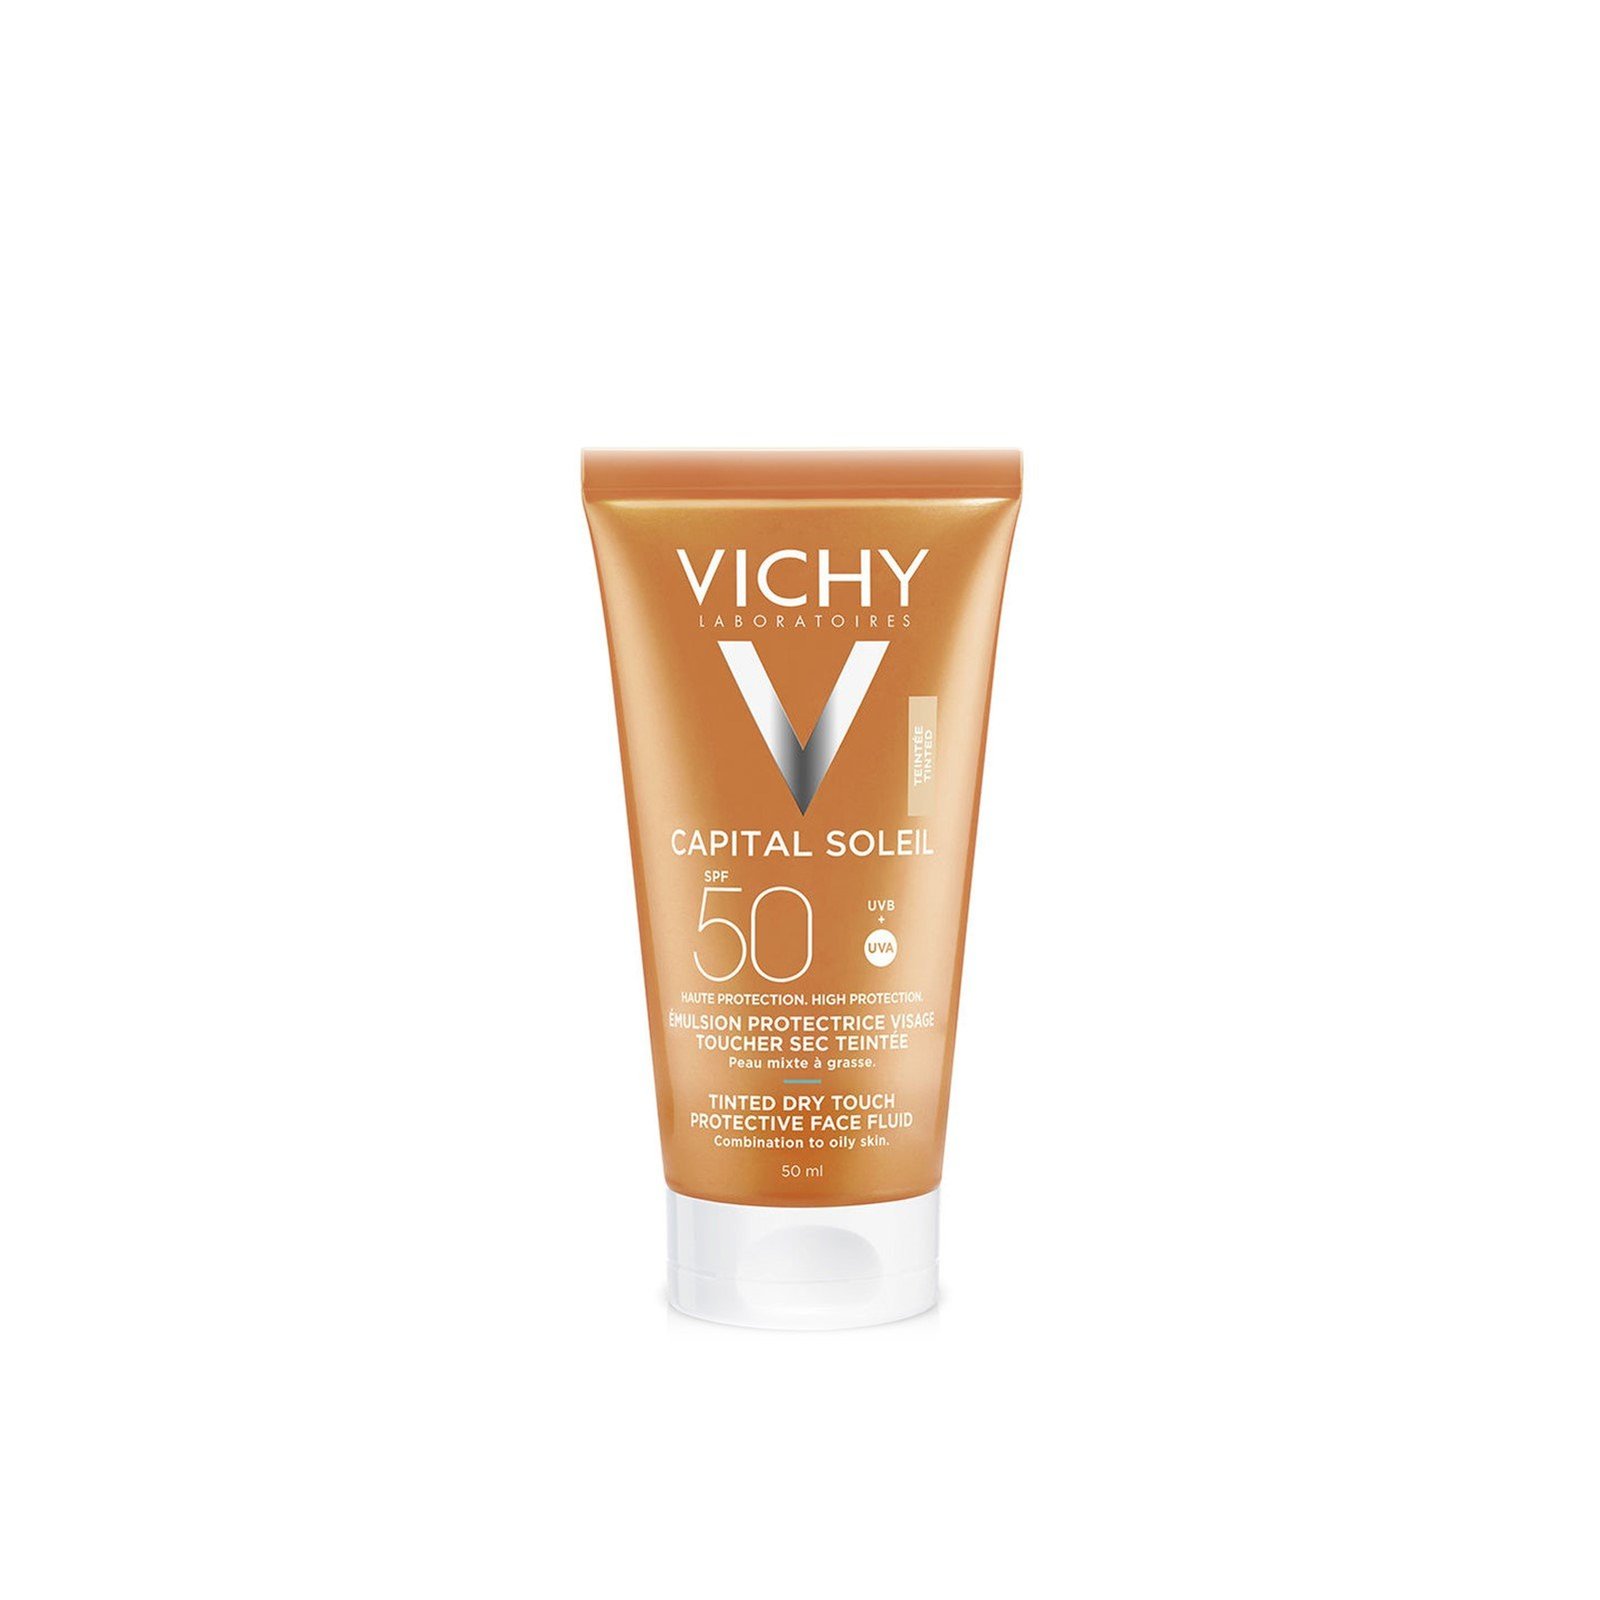 Vichy Capital Soleil Tinted Dry Touch Protective Face Fluid SPF50 50ml (1.69fl oz)